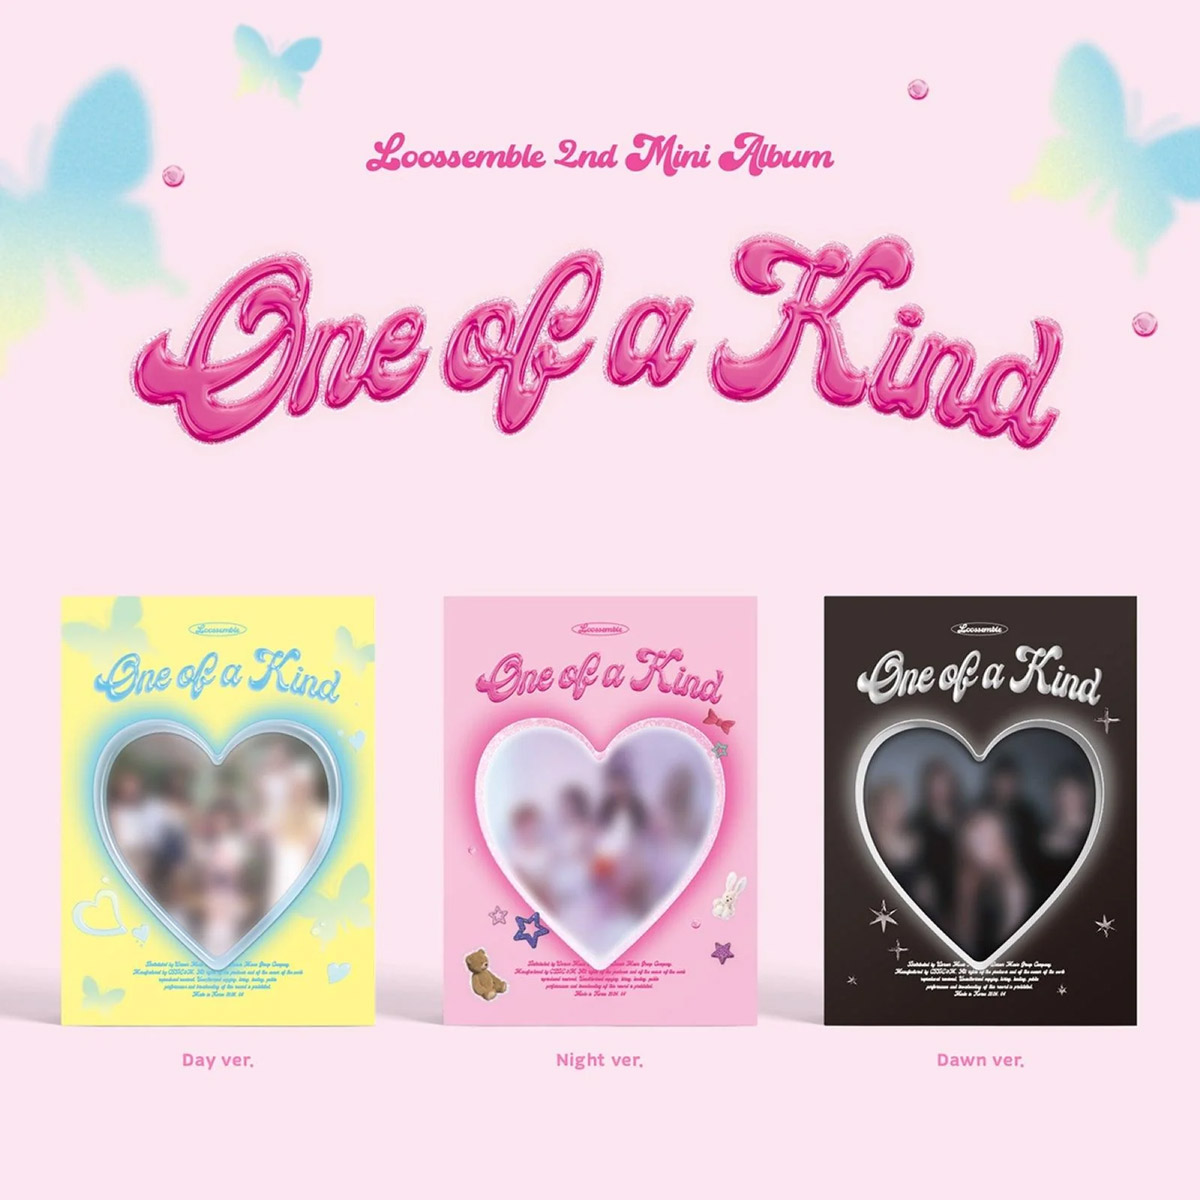 Loosemble Unveils Their Second Mini-Album “One of a Kind”: A Journey of Choice and Destiny